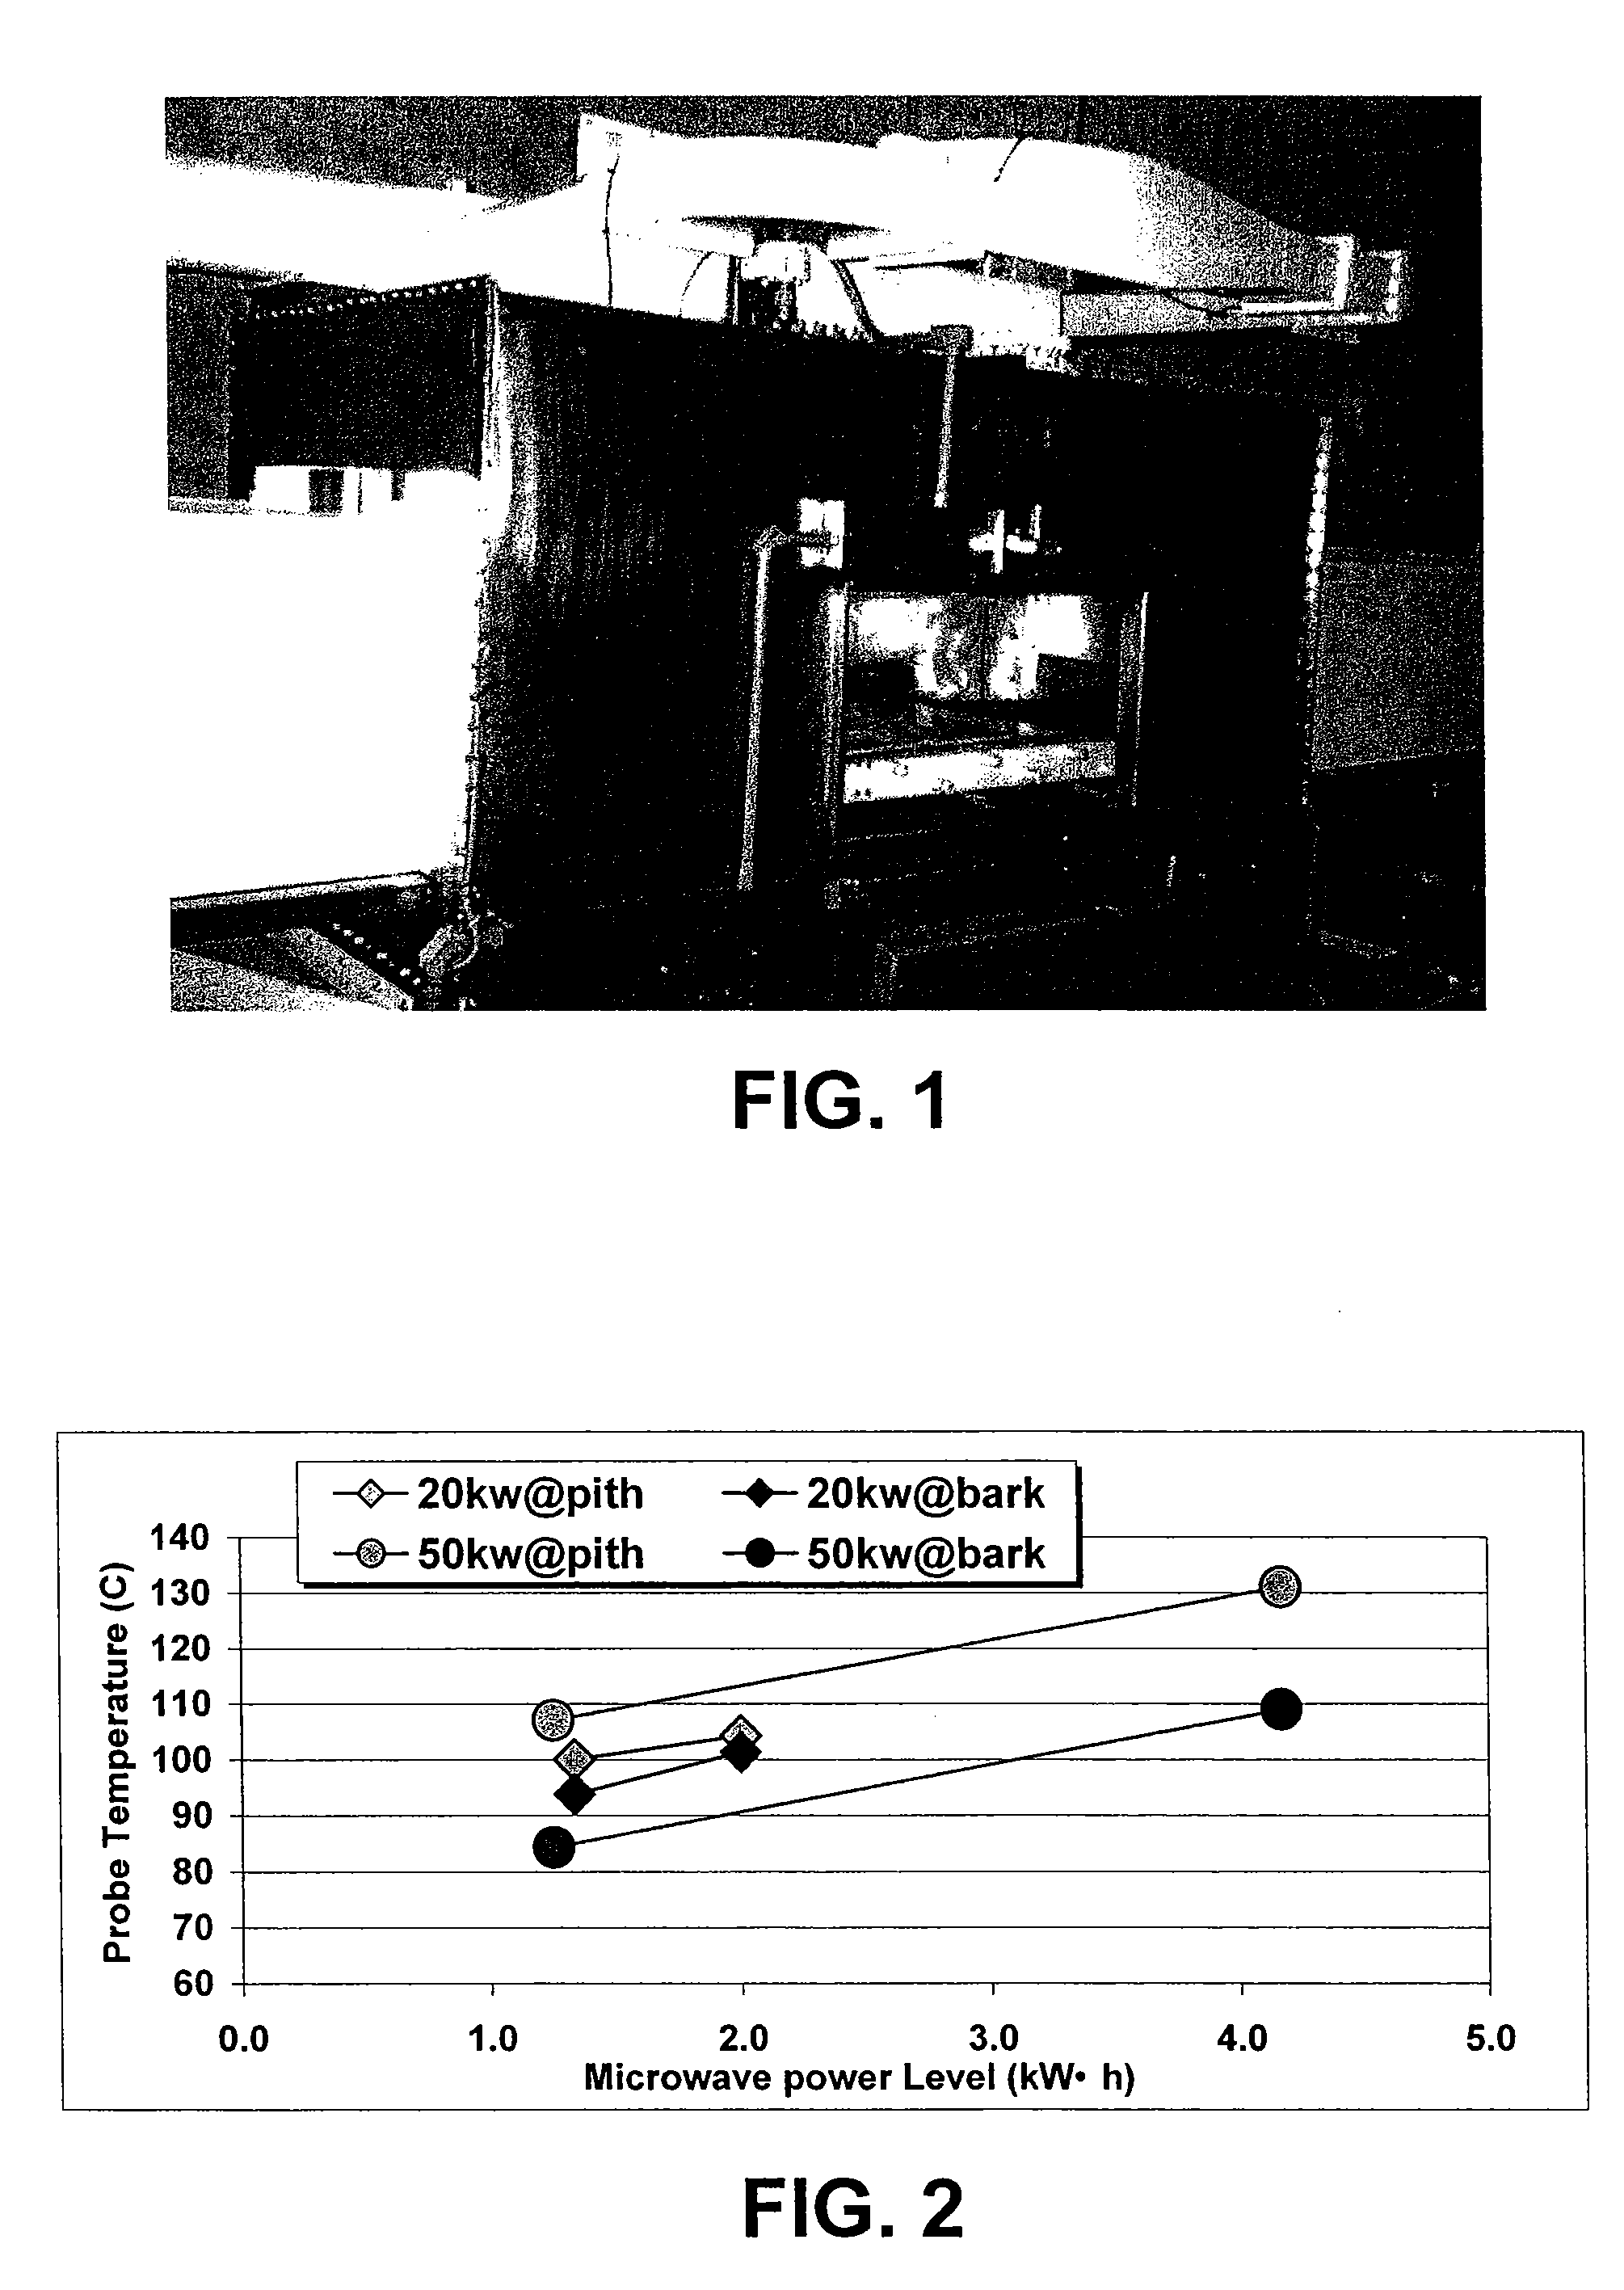 Microwave pretreatment of logs for use in making paper and other wood products